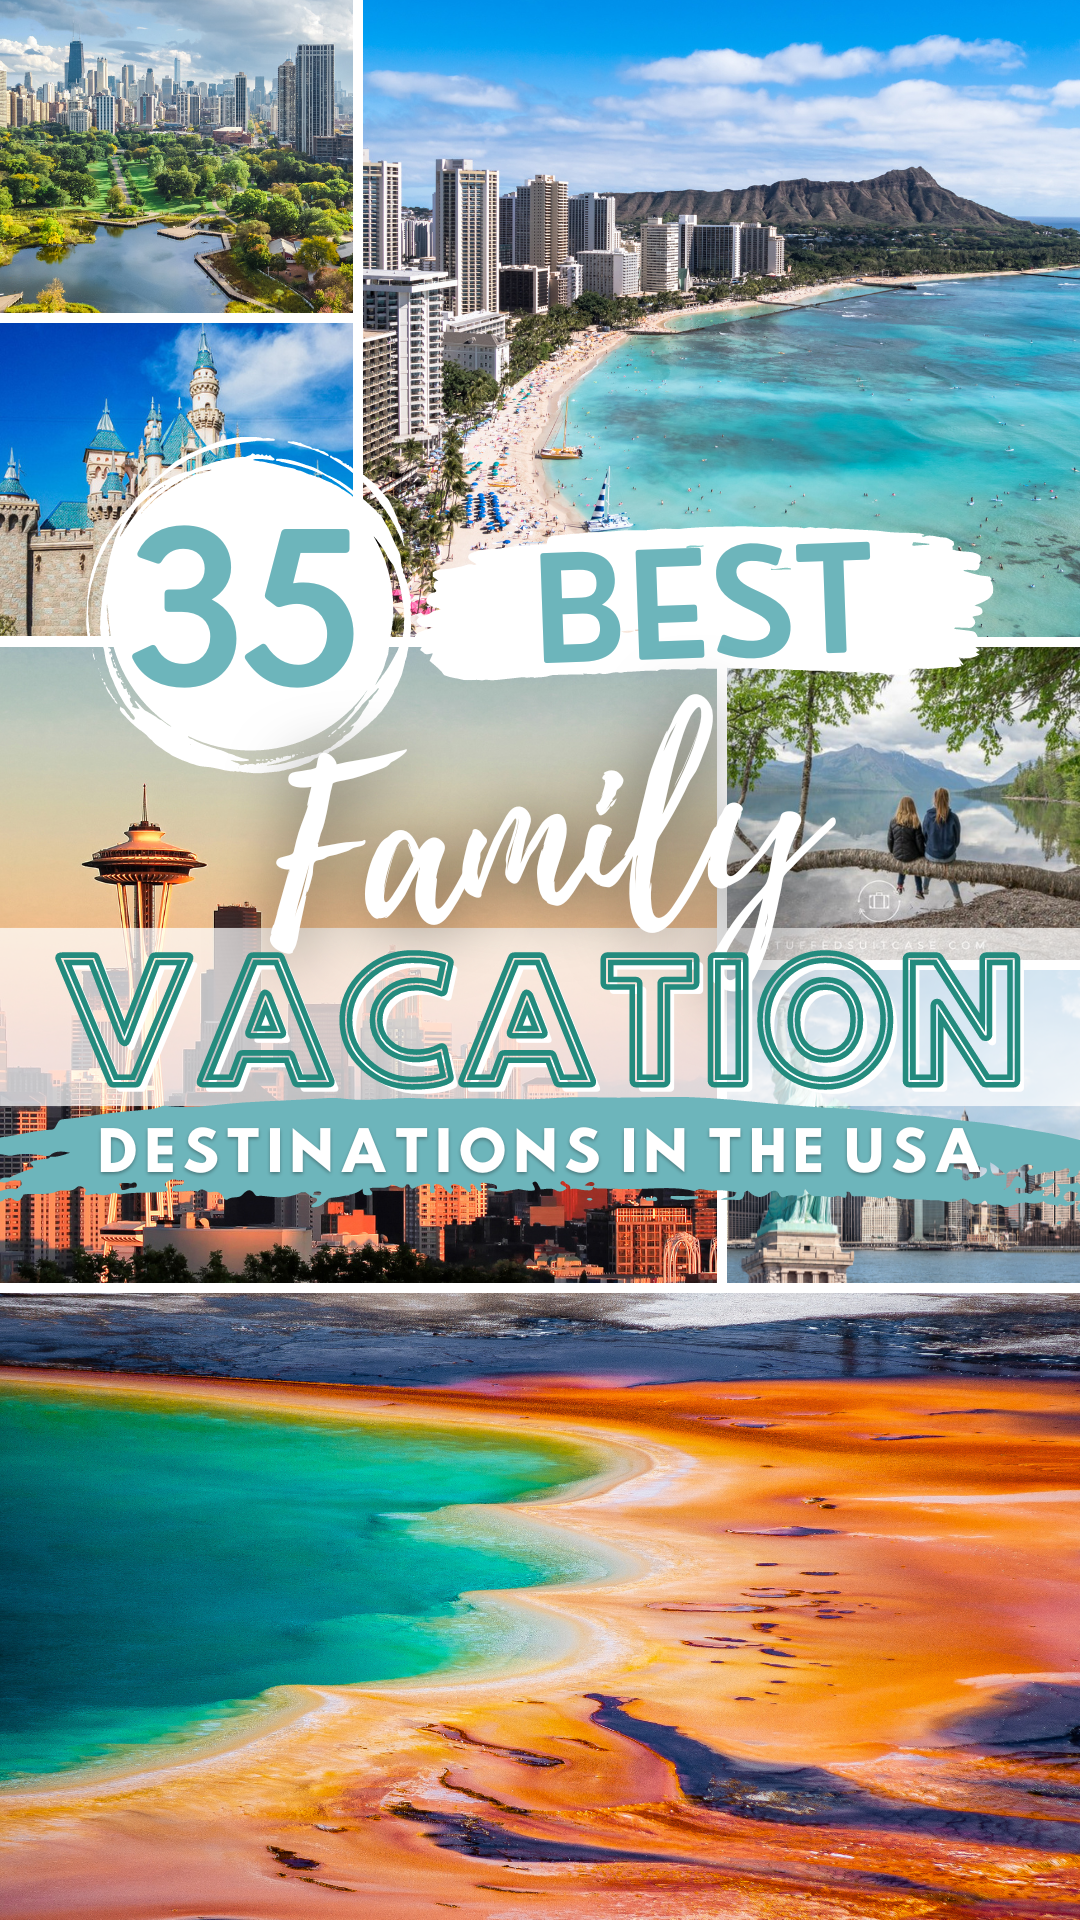 best family vacation spots in the United States - image collage with text overlay